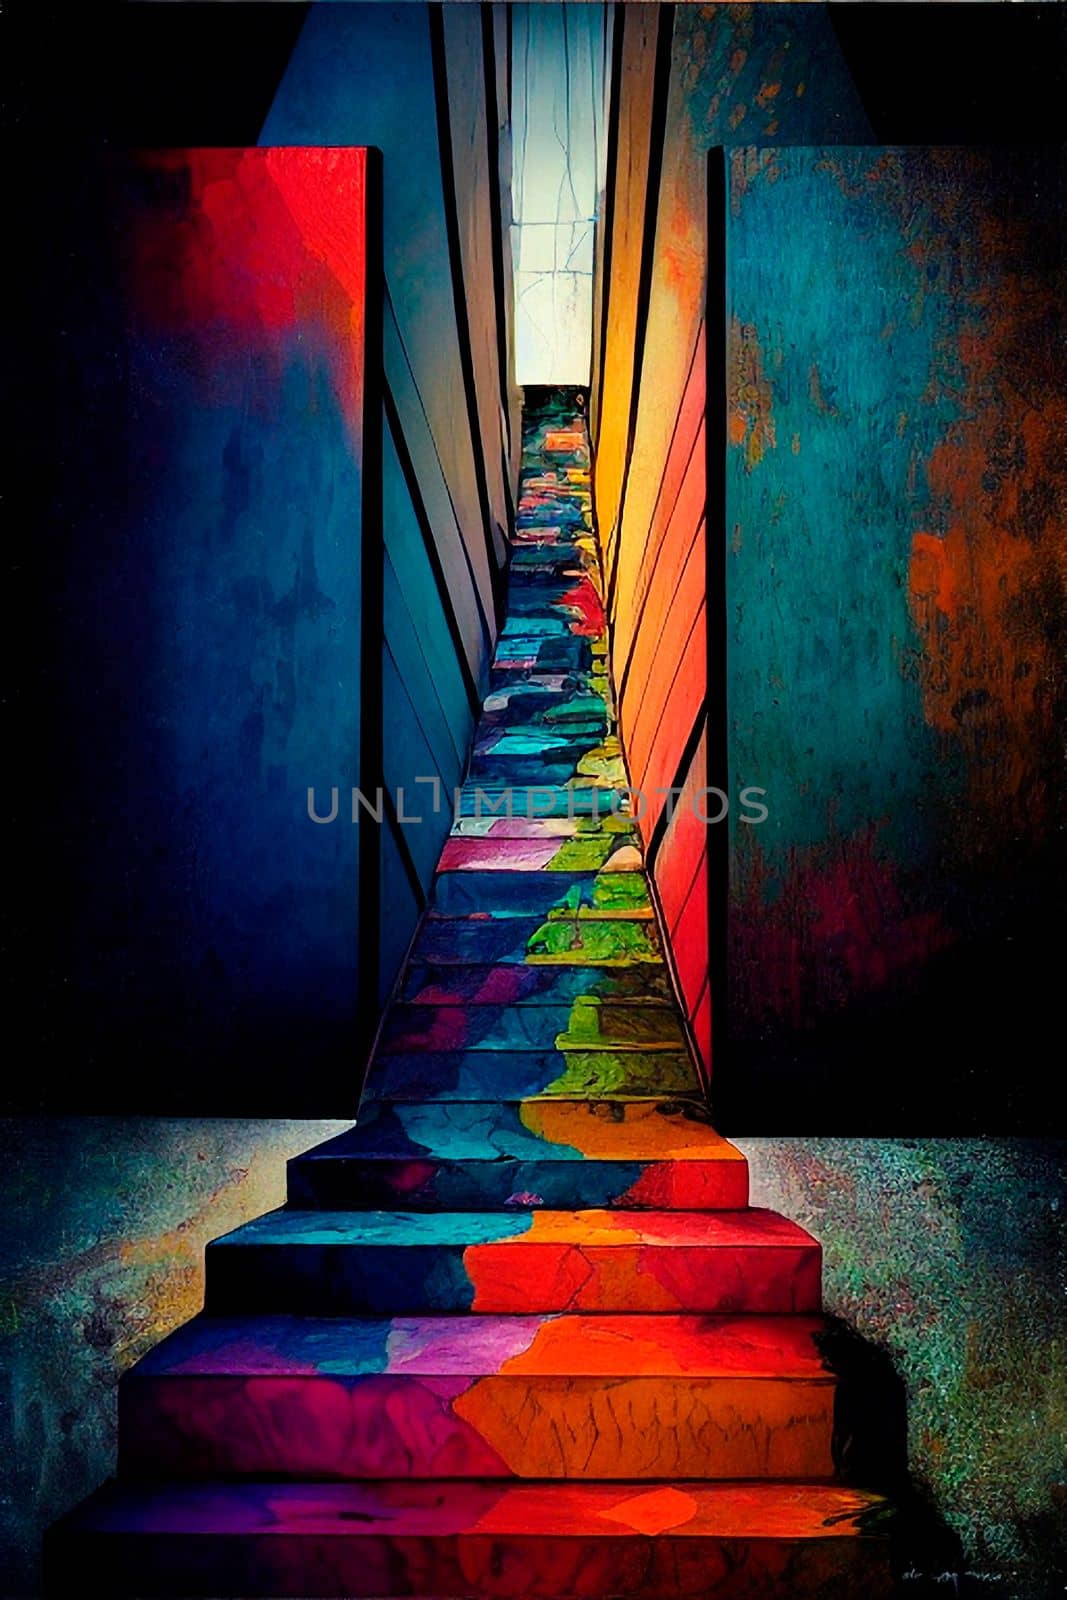 Climbing the stairs, psychedelic colors, searching for himself. Stairway to other world. High quality illustration